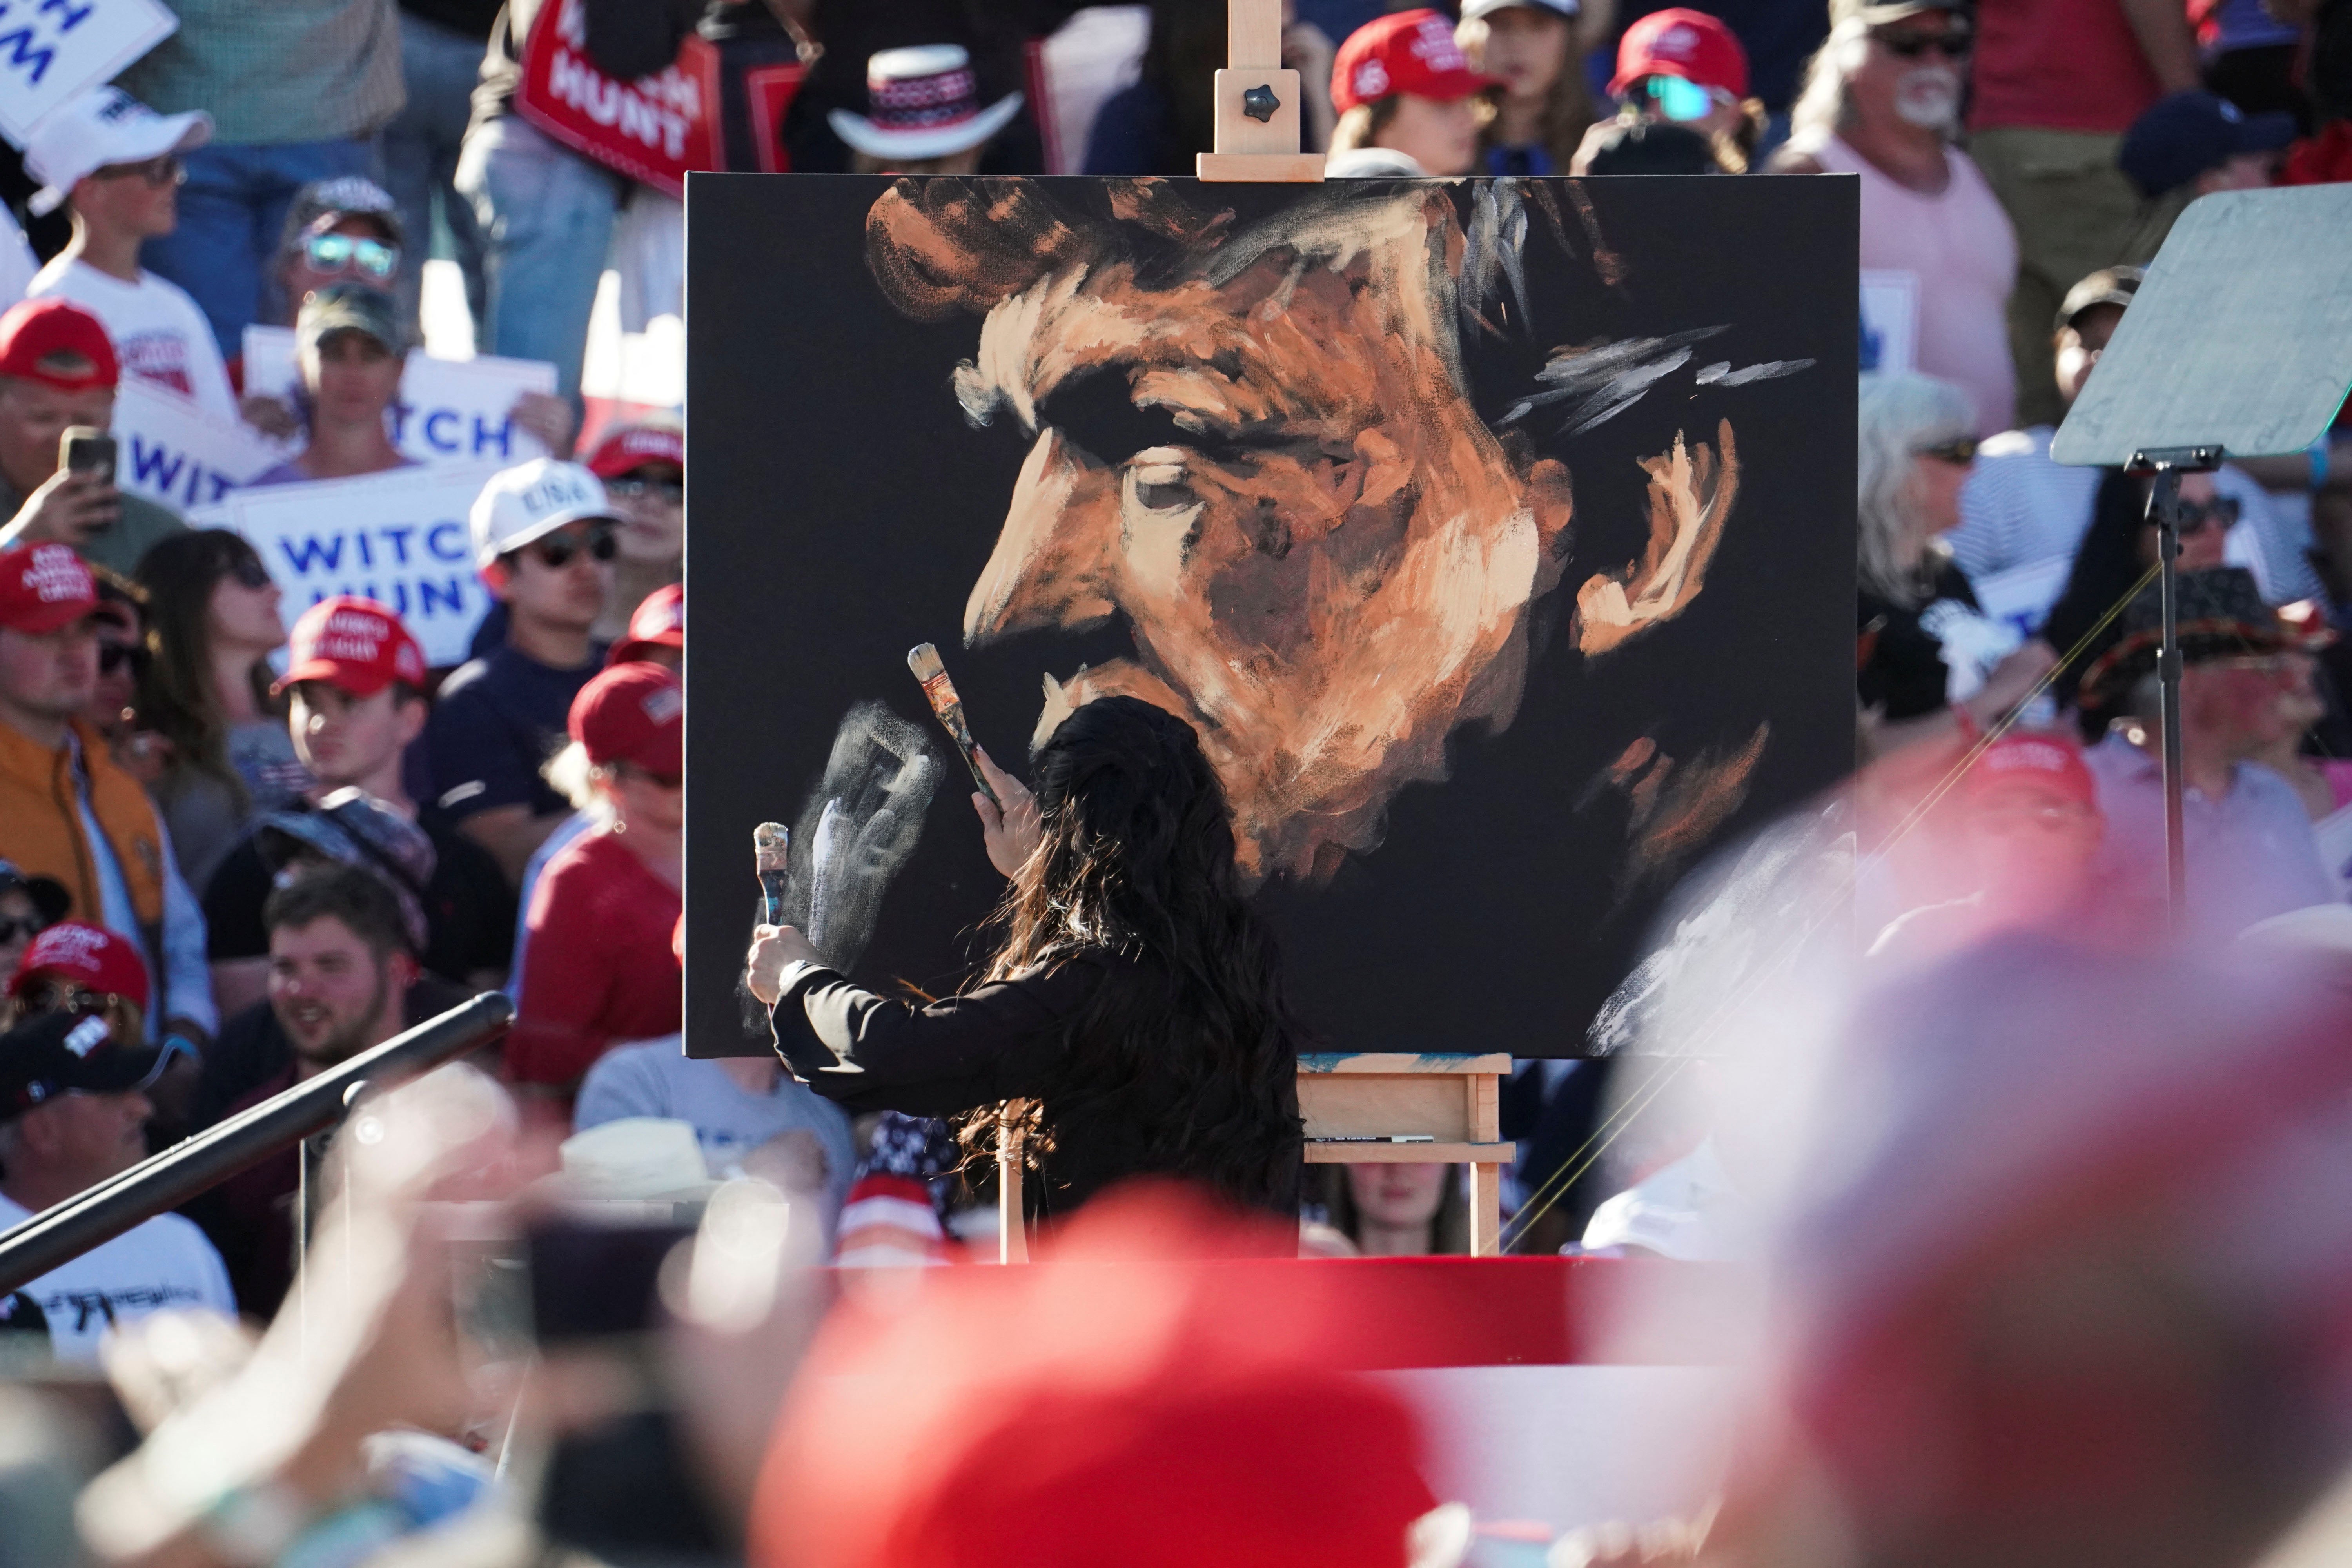 An artist paints a portrait of former Trump before his appearance on stage at Waco